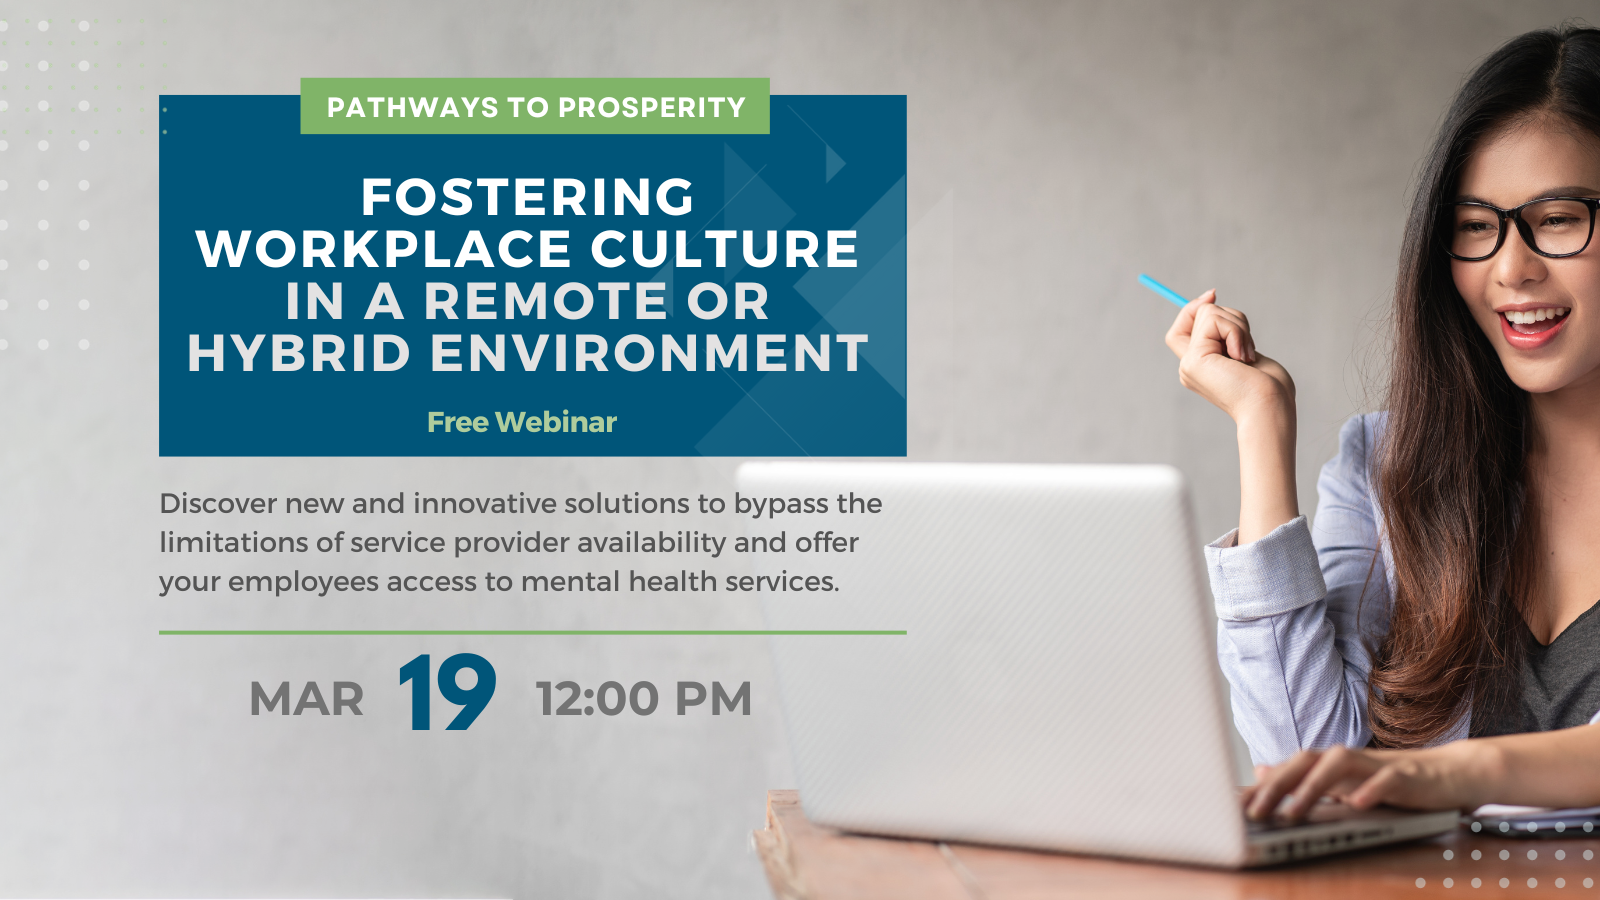 Fostering Workplace Culture in a Remote or Hybrid Environment Webinar